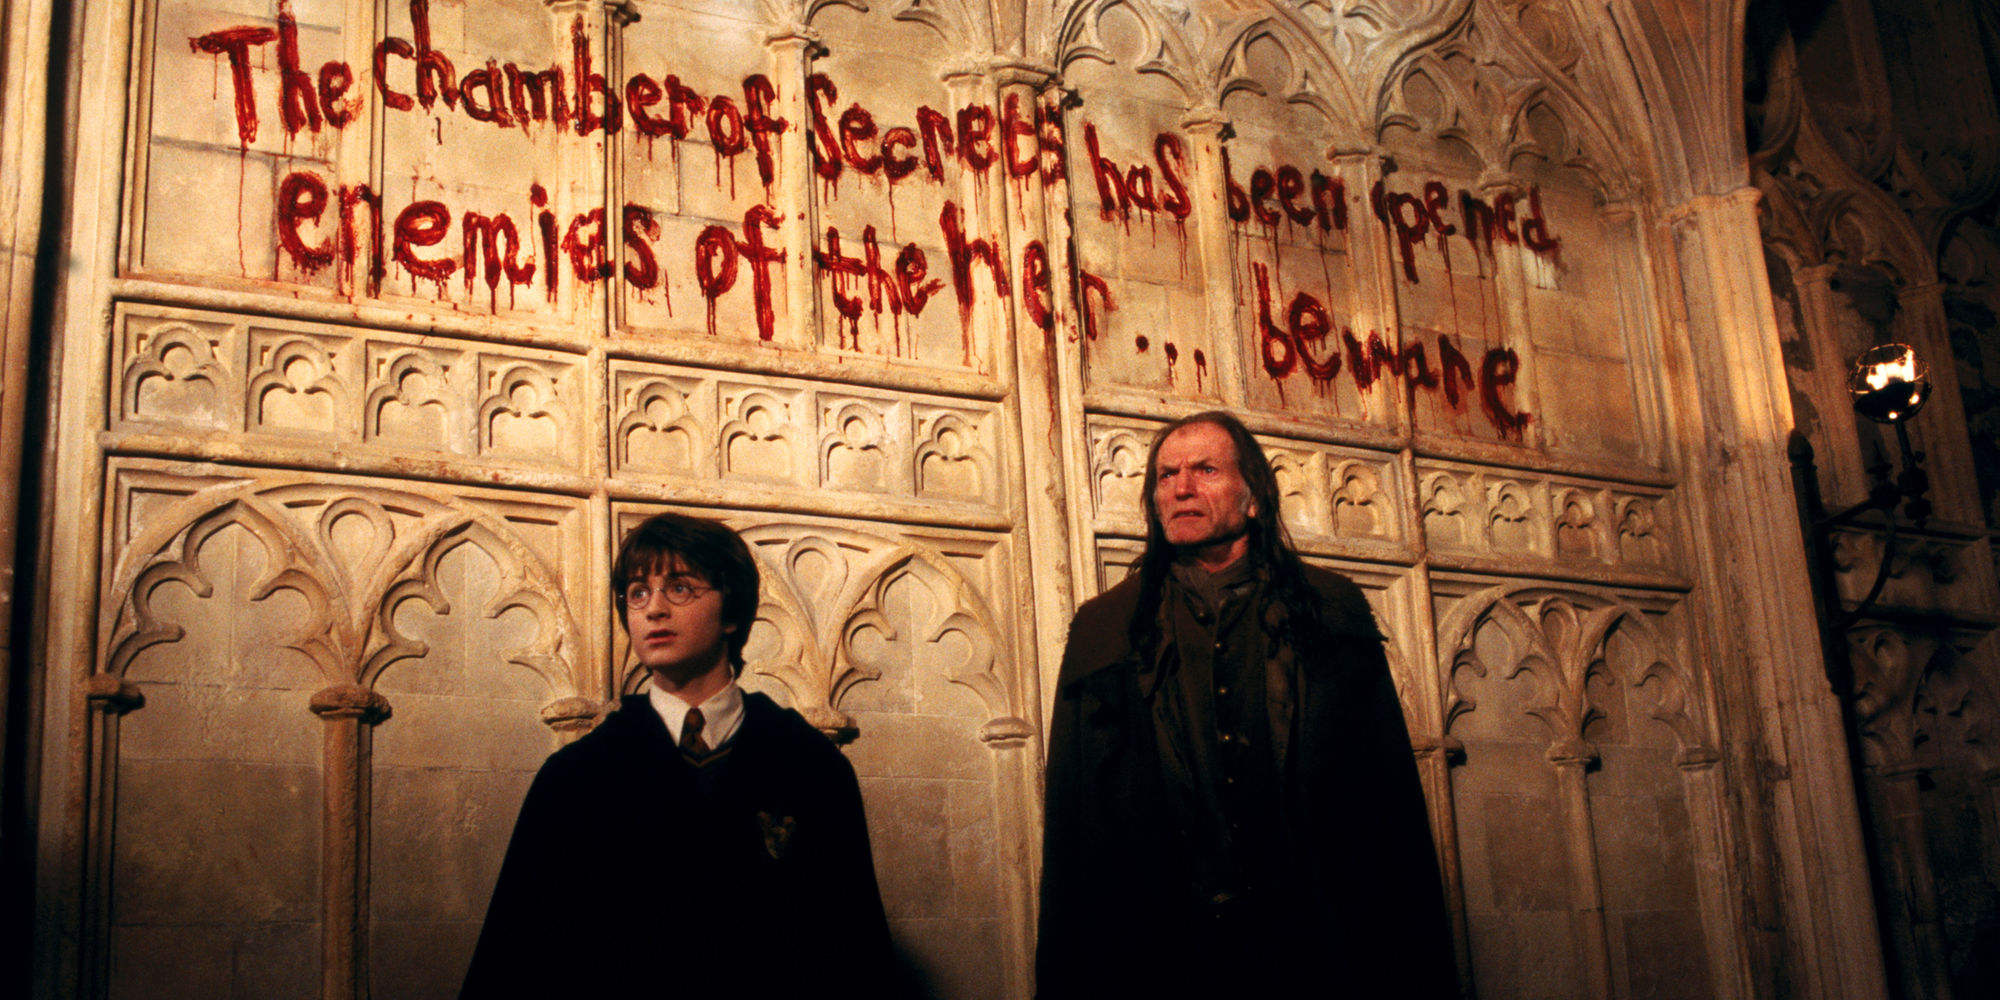 Chamber Of Secrets, Message on the wall, Harry and Filch, Enemies of the heir beware